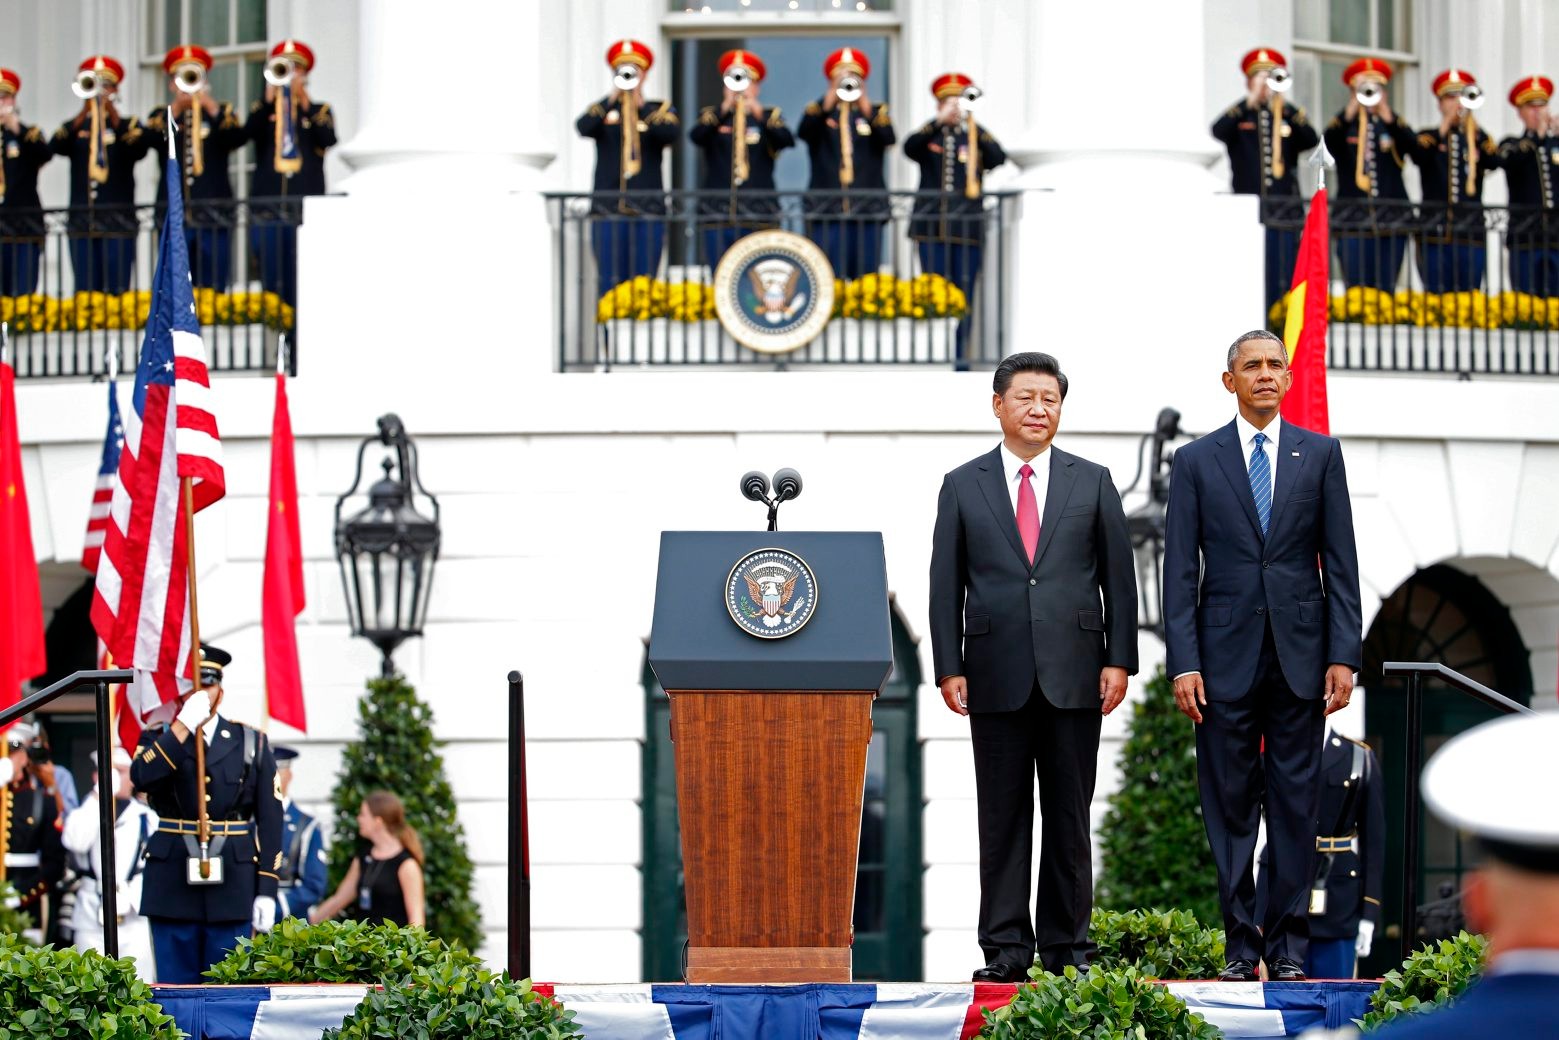 President Barack Obama and Chinese President Xi Jinping stand at attention for the playing of each counties national anthem during an official state arrival ceremony for the Chinese president, Friday, Sept. 25, 2015, on the South Lawn of the White House in Washington.  (AP Photo/Evan Vucci) Obama US China